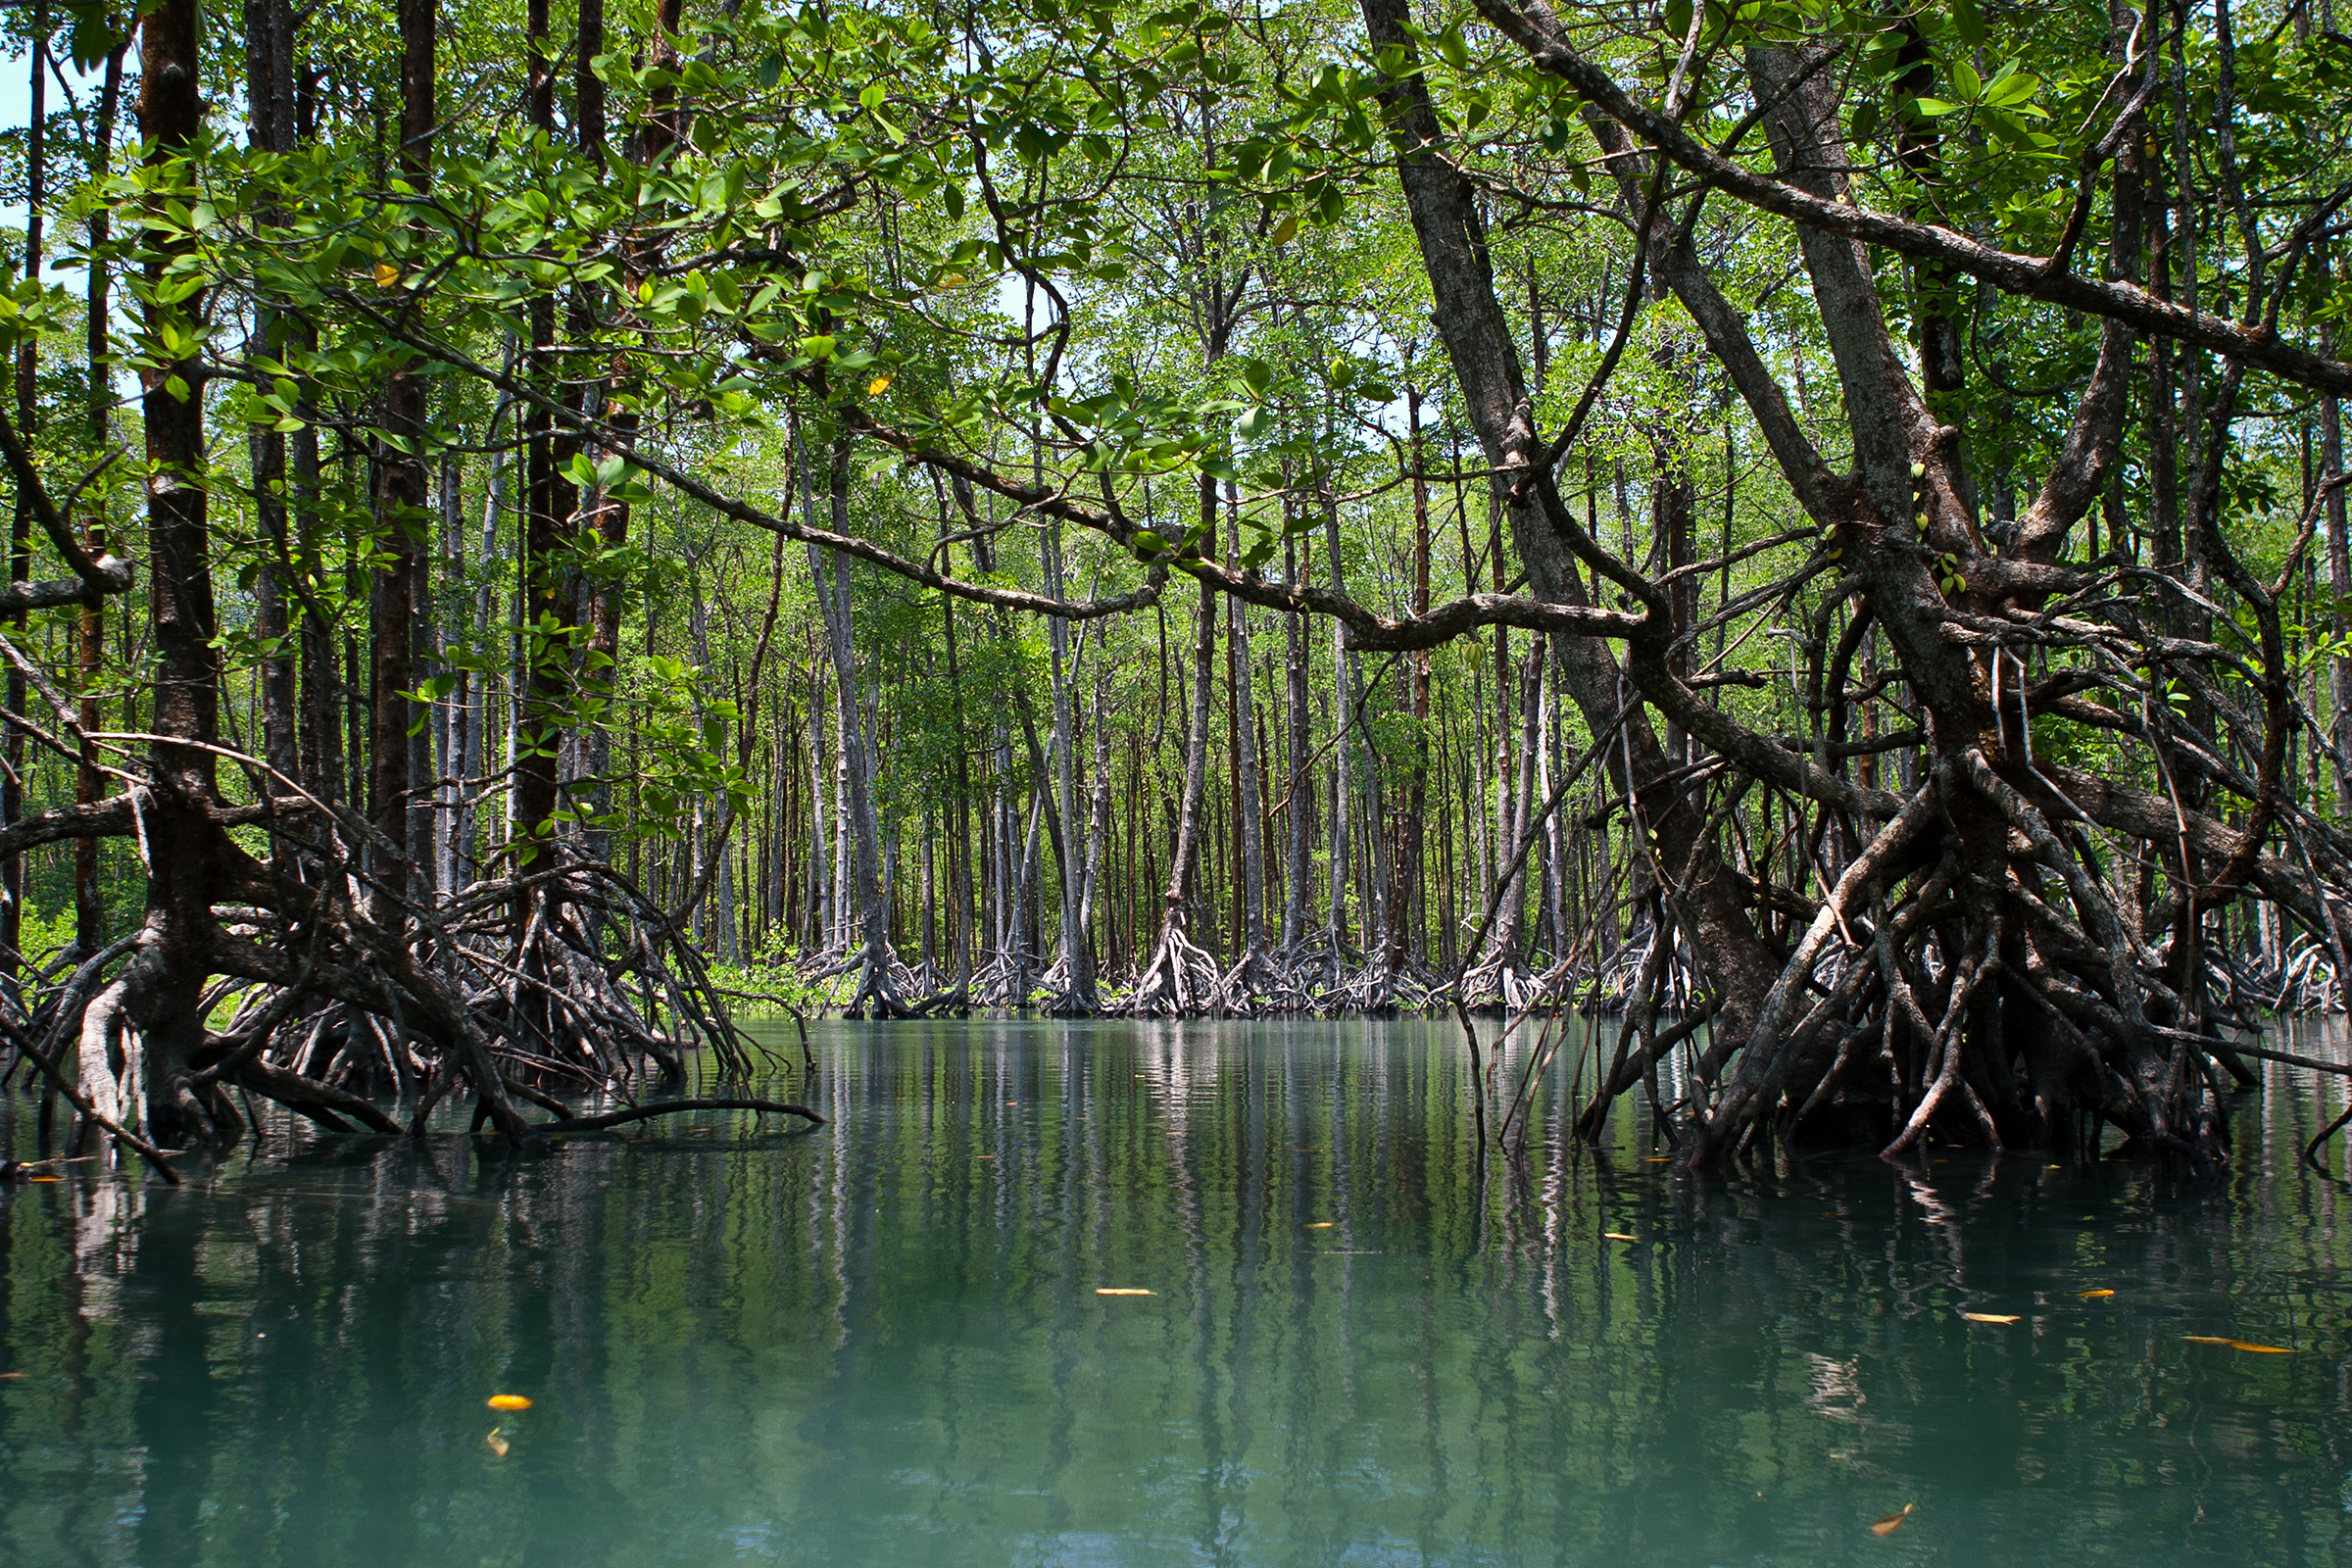 Massive mangrove trees make up extensive forests in the Mergui Archipelago in Myanmar, just above the border of Thailand. This region is in the Andaman Sea and is home to sea gypsies called Moken.